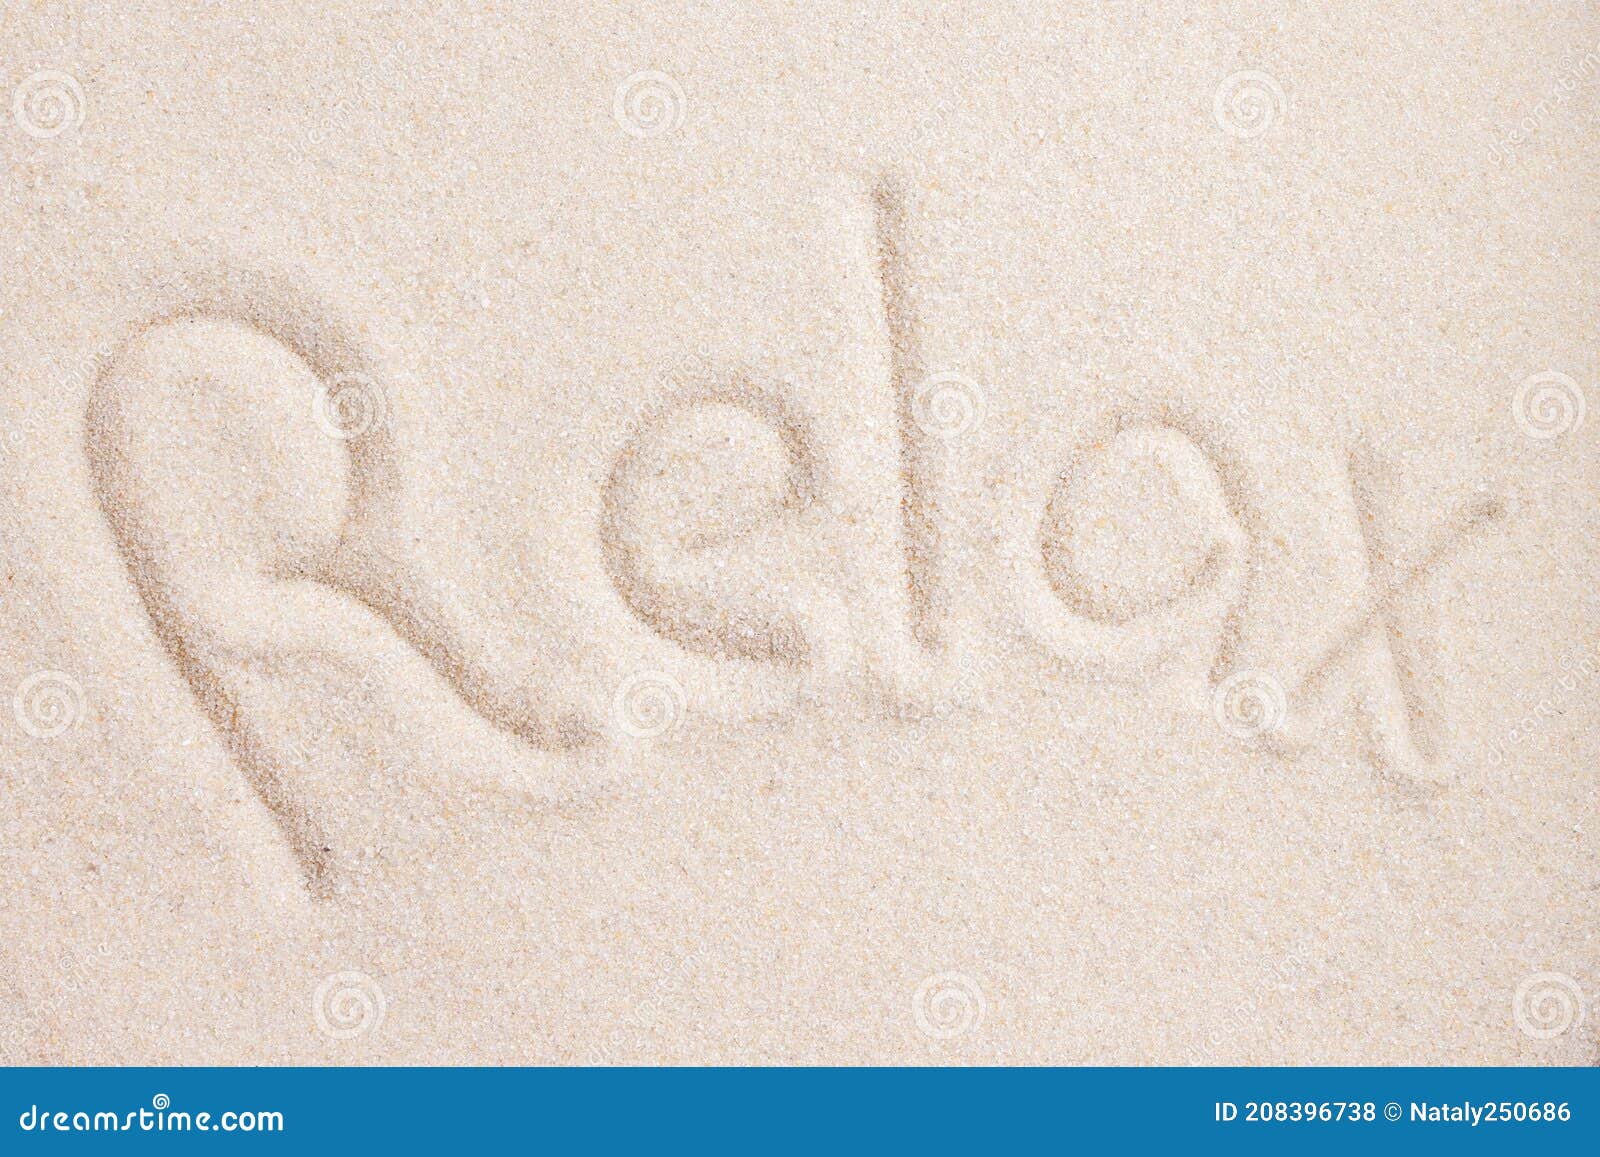 handwritting word relax in sand above view macro